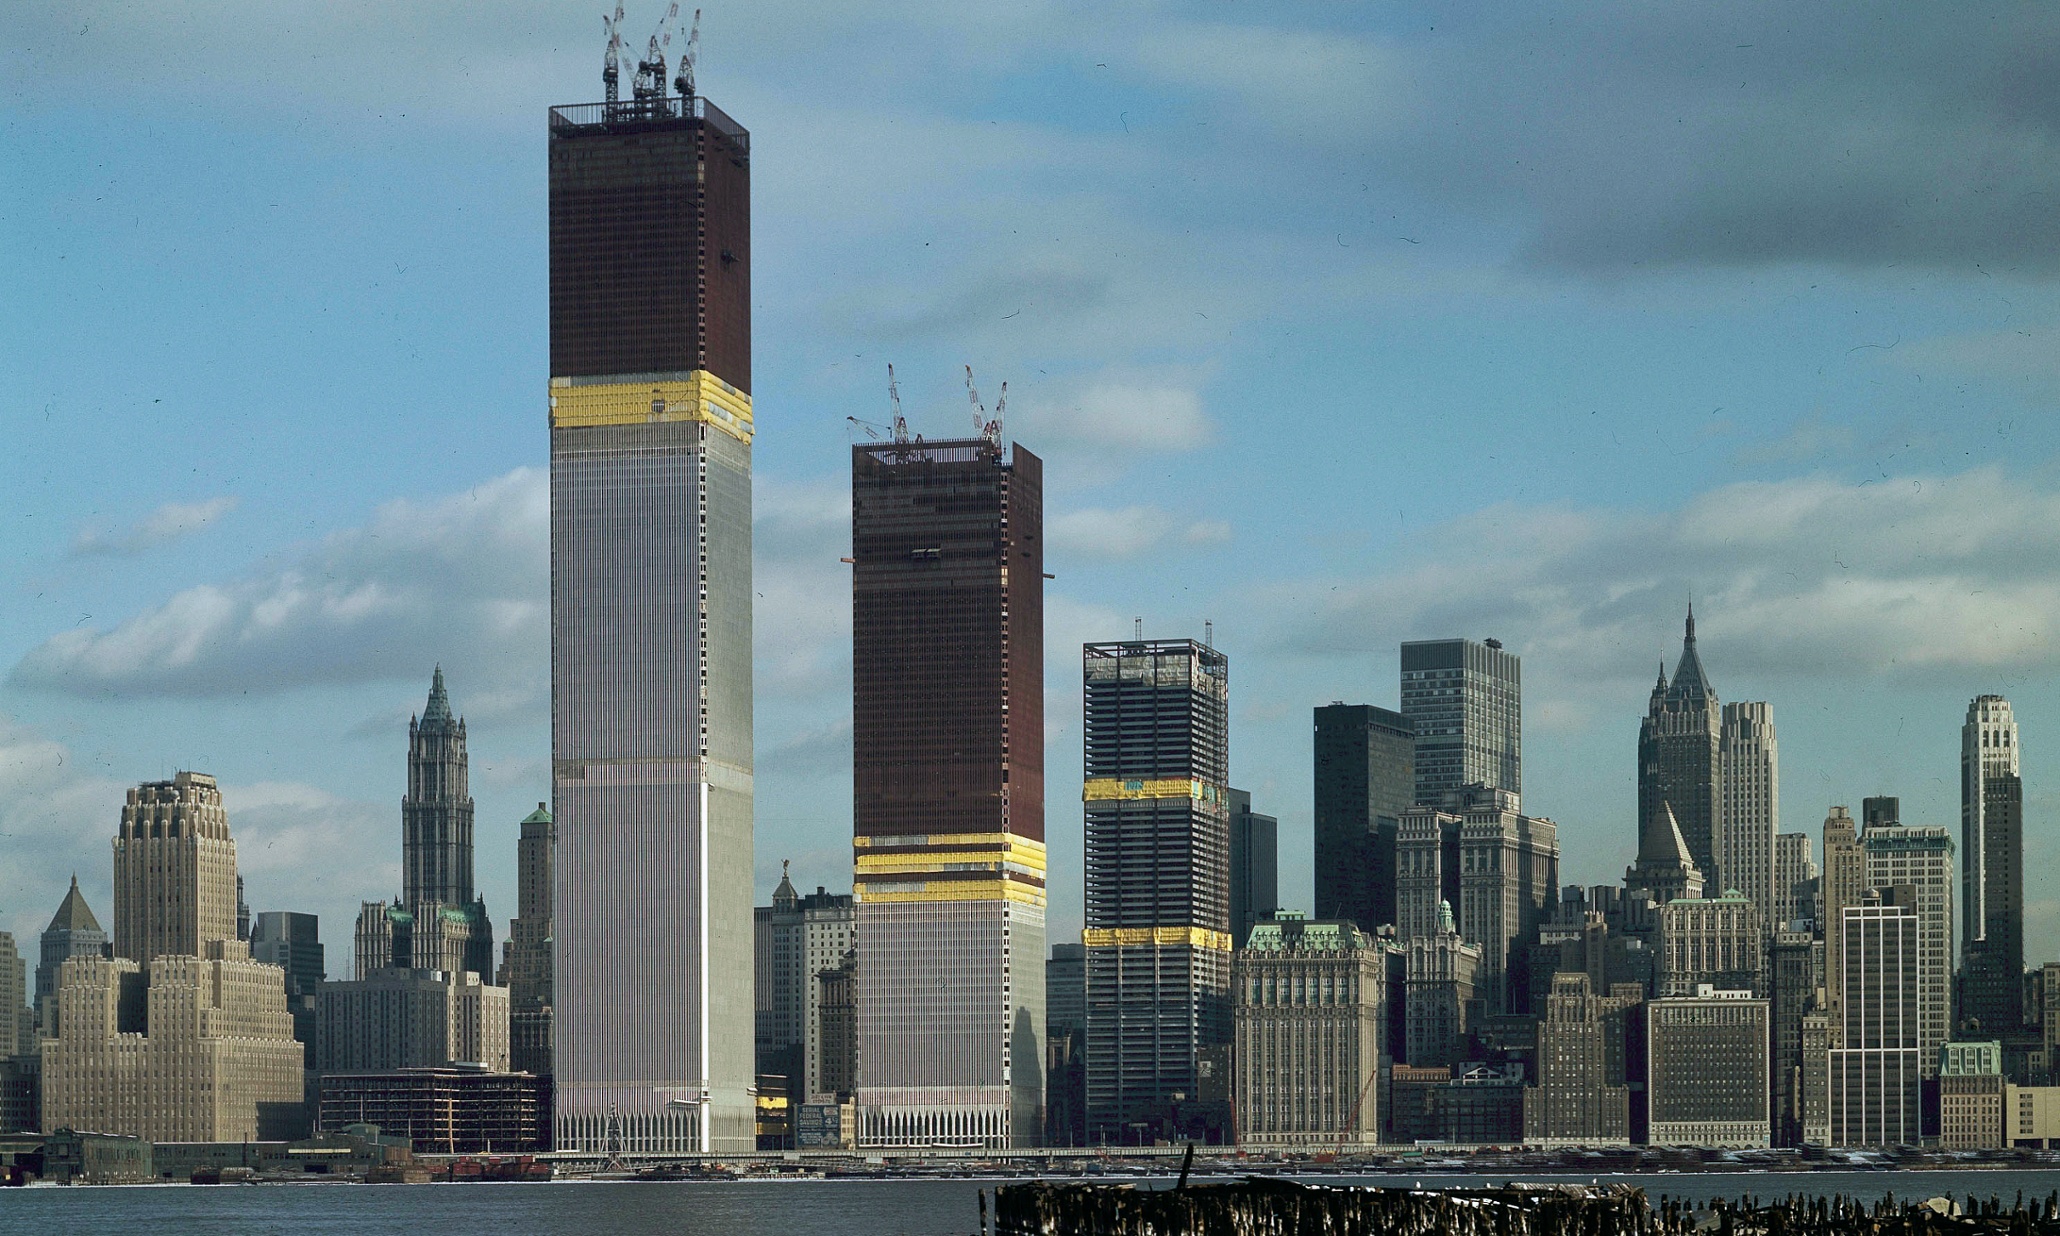 New York's twin towers – the 'filing cabinets' that became icons of America: a history of cities in 50 buildings, day 40